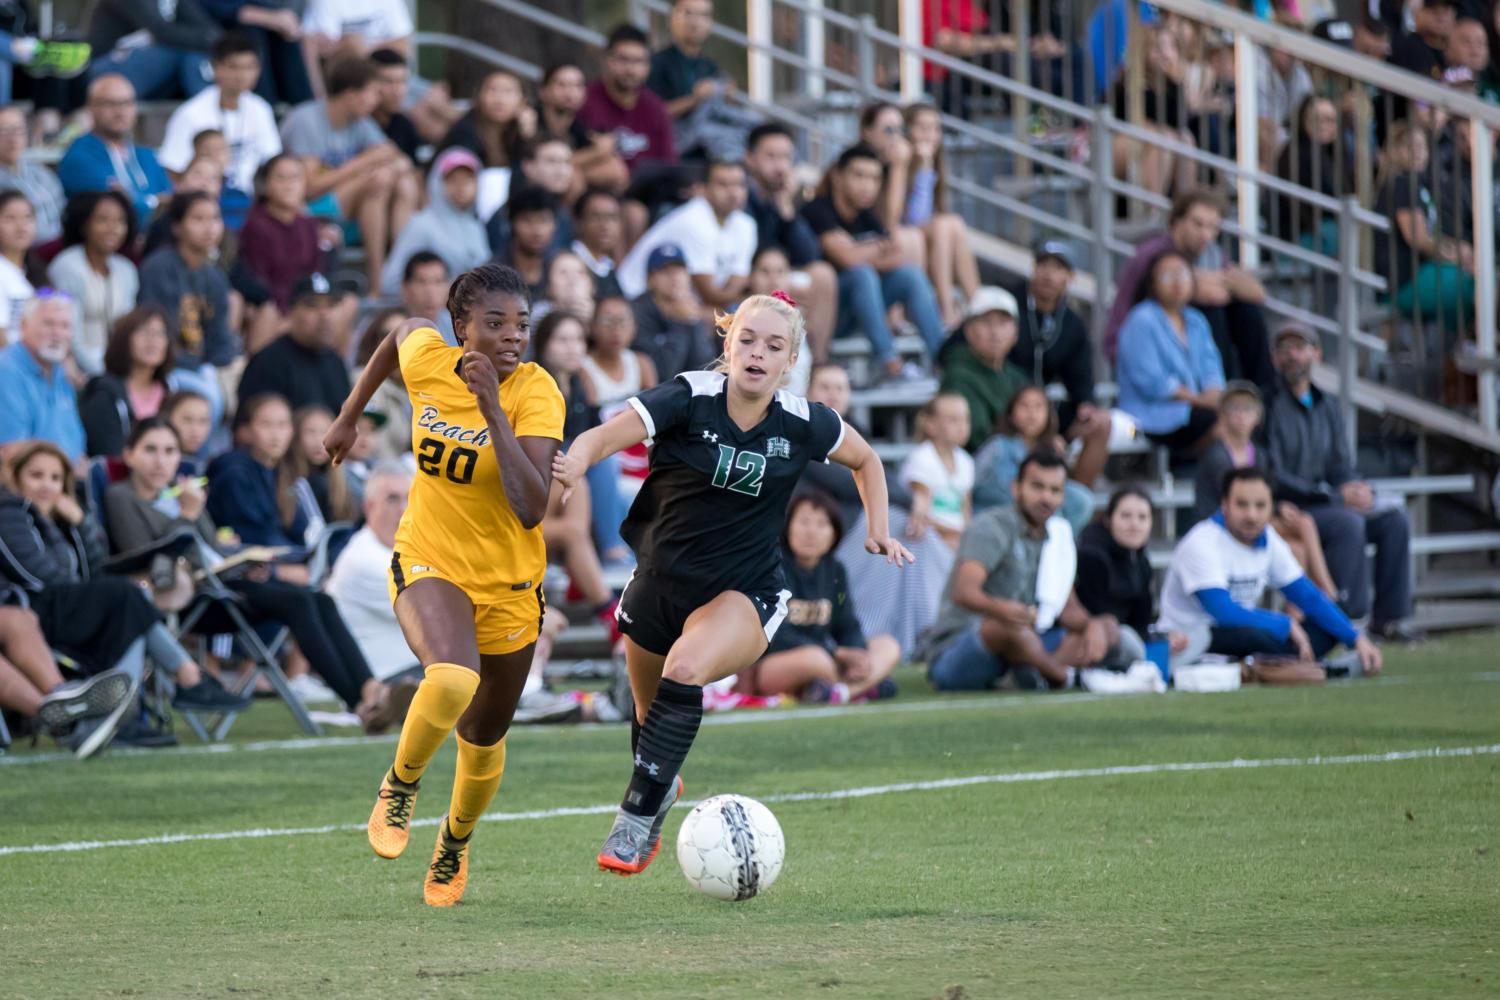 Senior forward Tori Bolden dribbled passed Hawai’i’s freshman Taylor Mason to score the first goal in the 32nd minute of play in Sunday’s match.